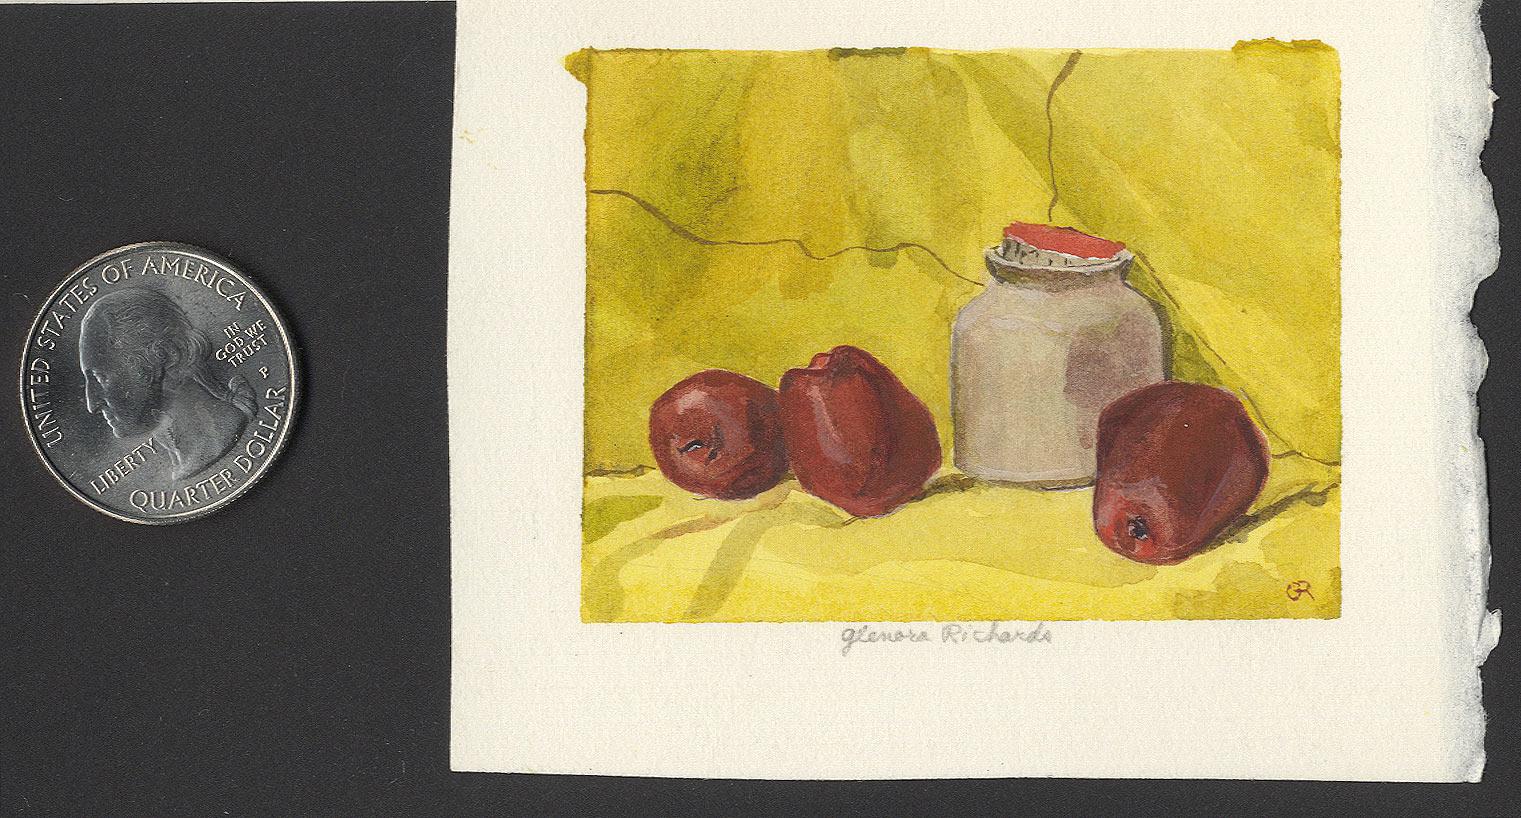 Apples and Jar on Yellow Background - Realist Art by Glenora Richards